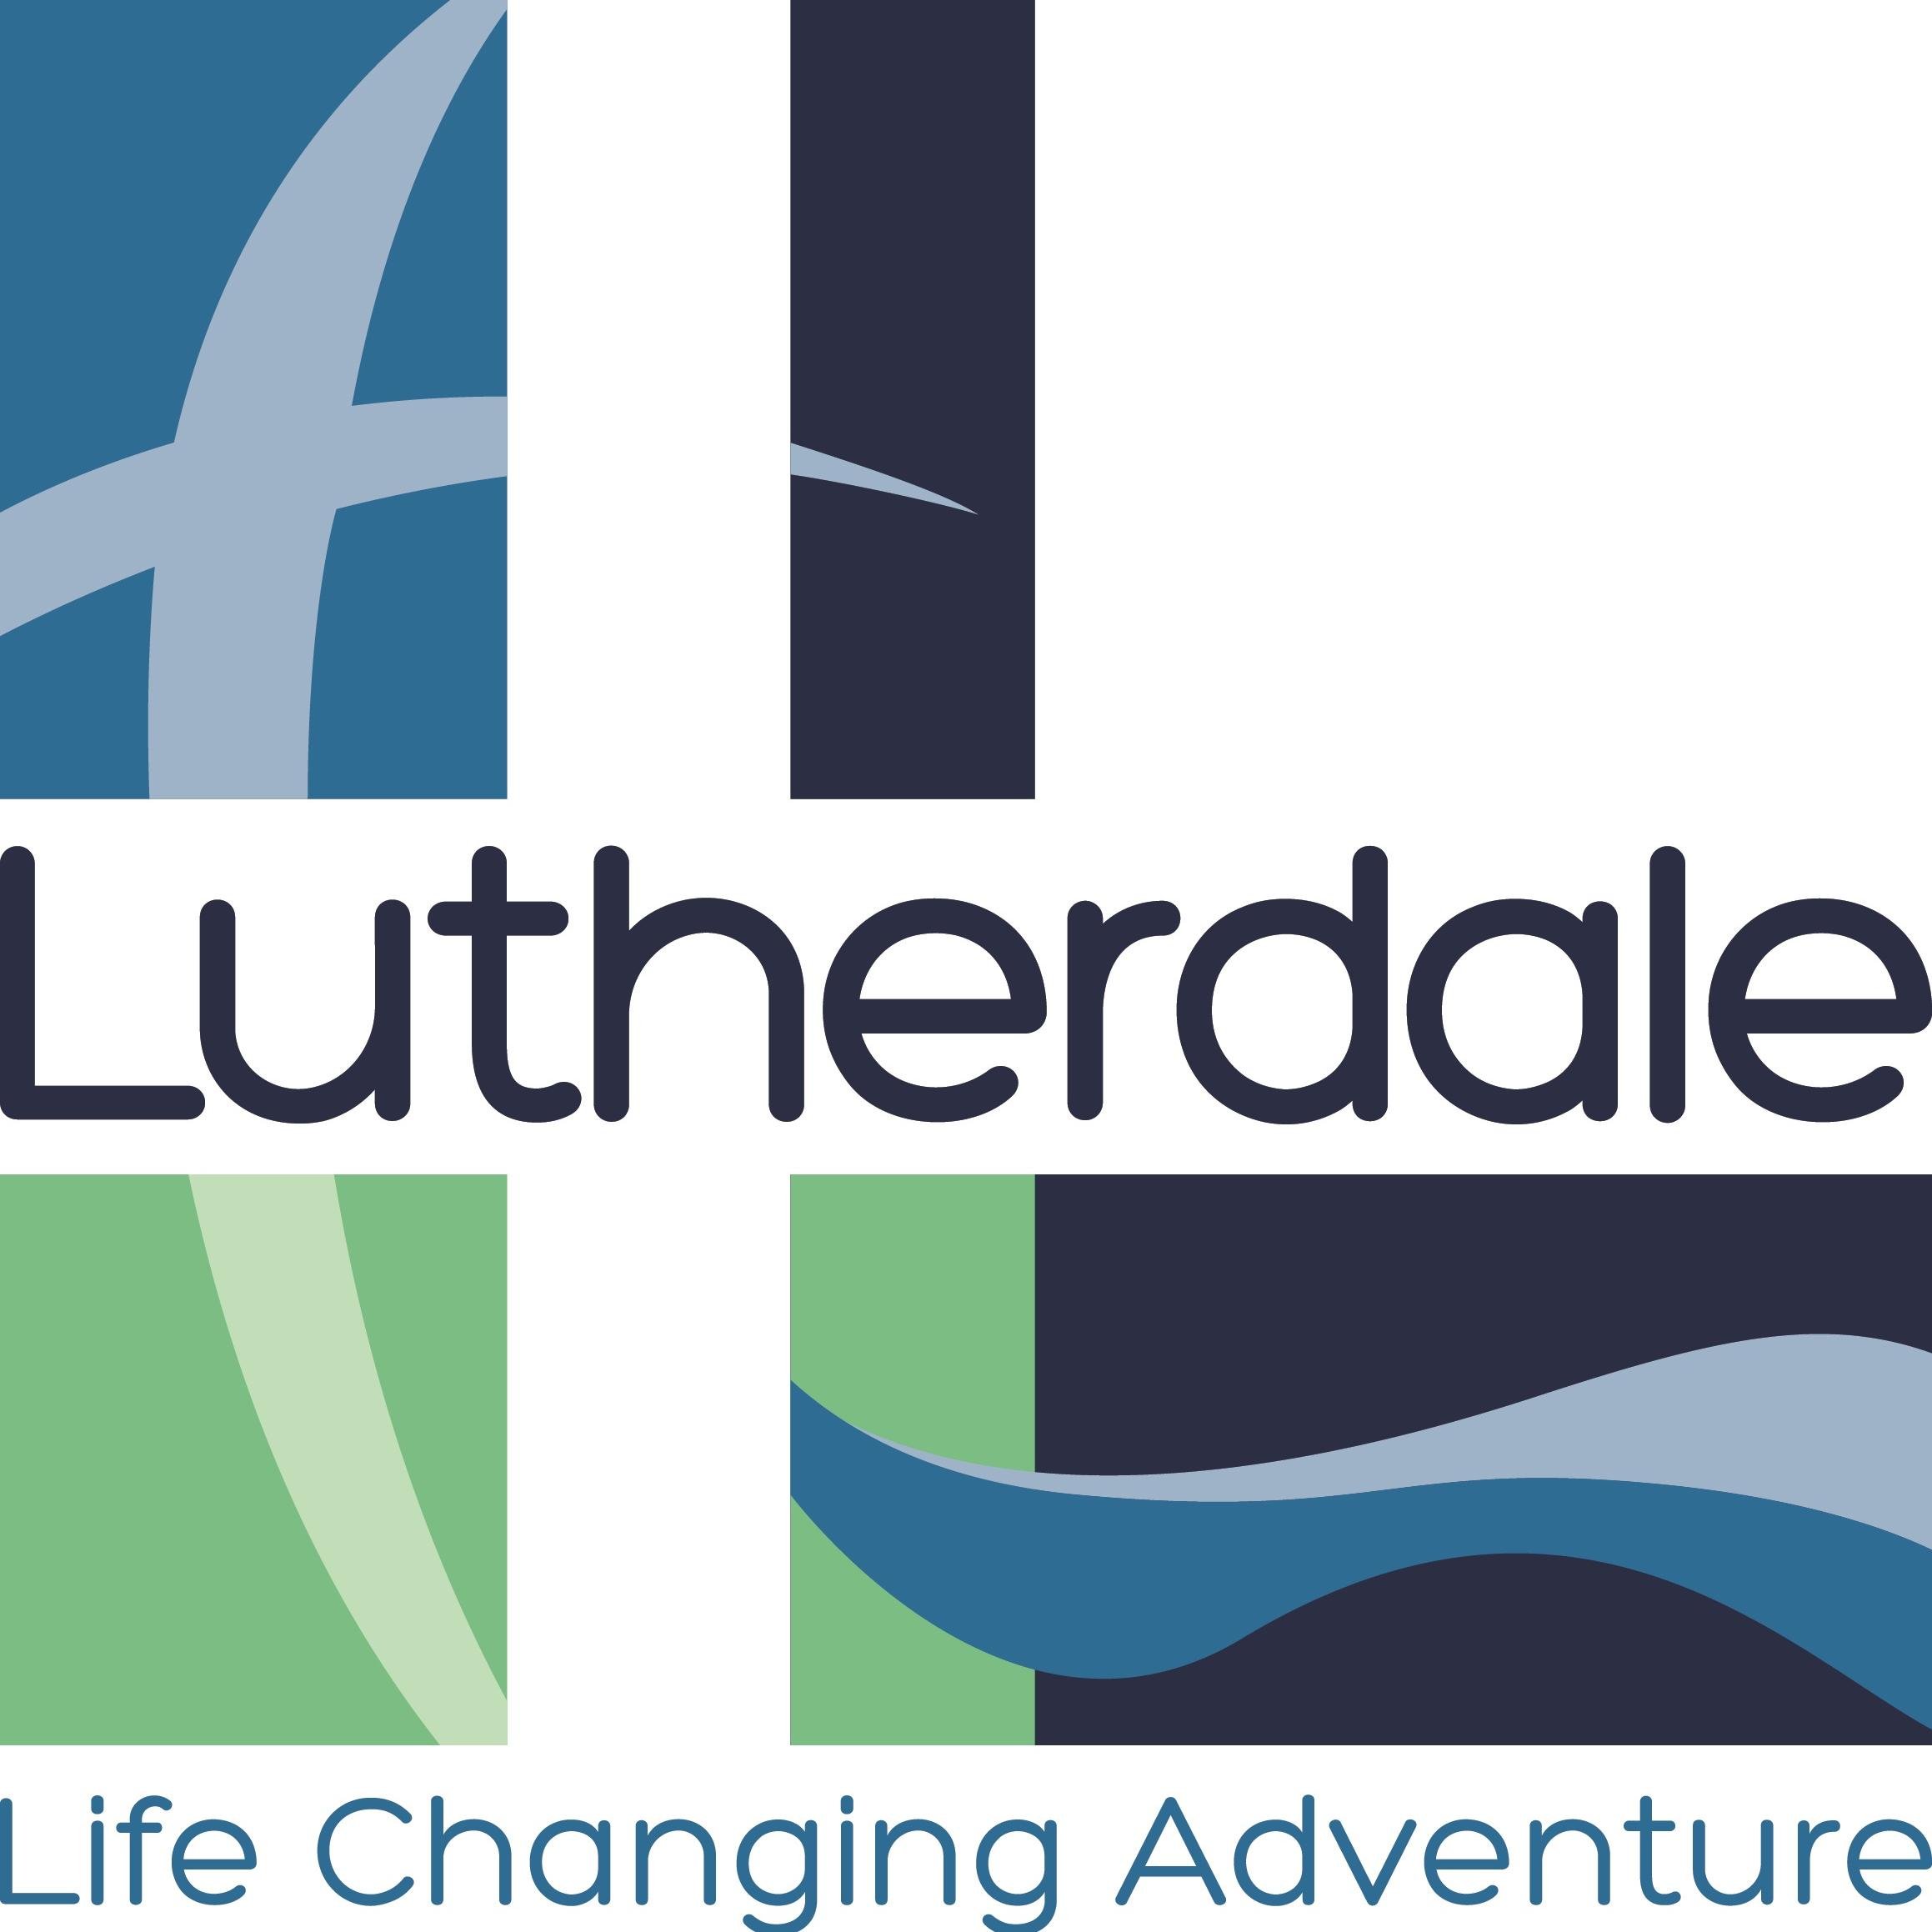 Started in 1944, Lutherdale is a summer camp, retreat facility and adventure center.